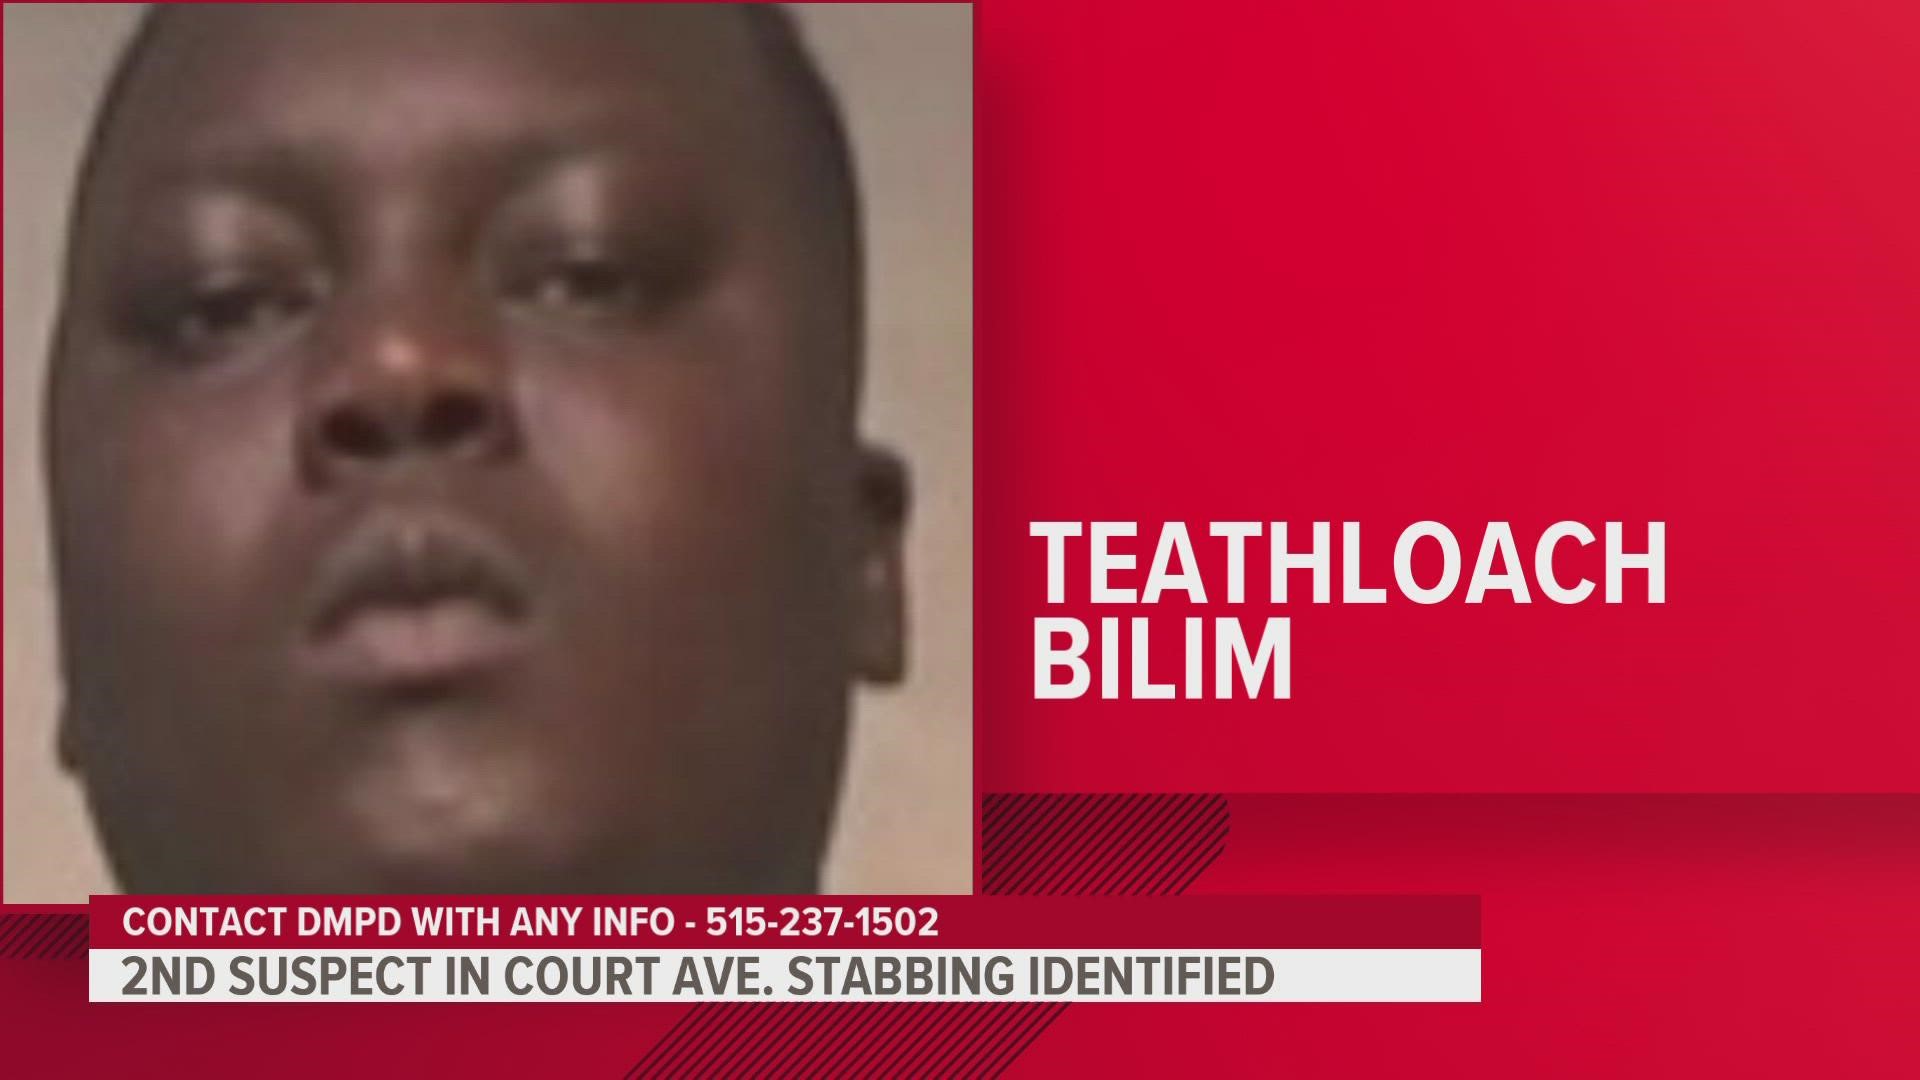 Police identified 24-year-old Teathloach Bilim as a second suspect in the stabbing Tuesday, Sept. 20.